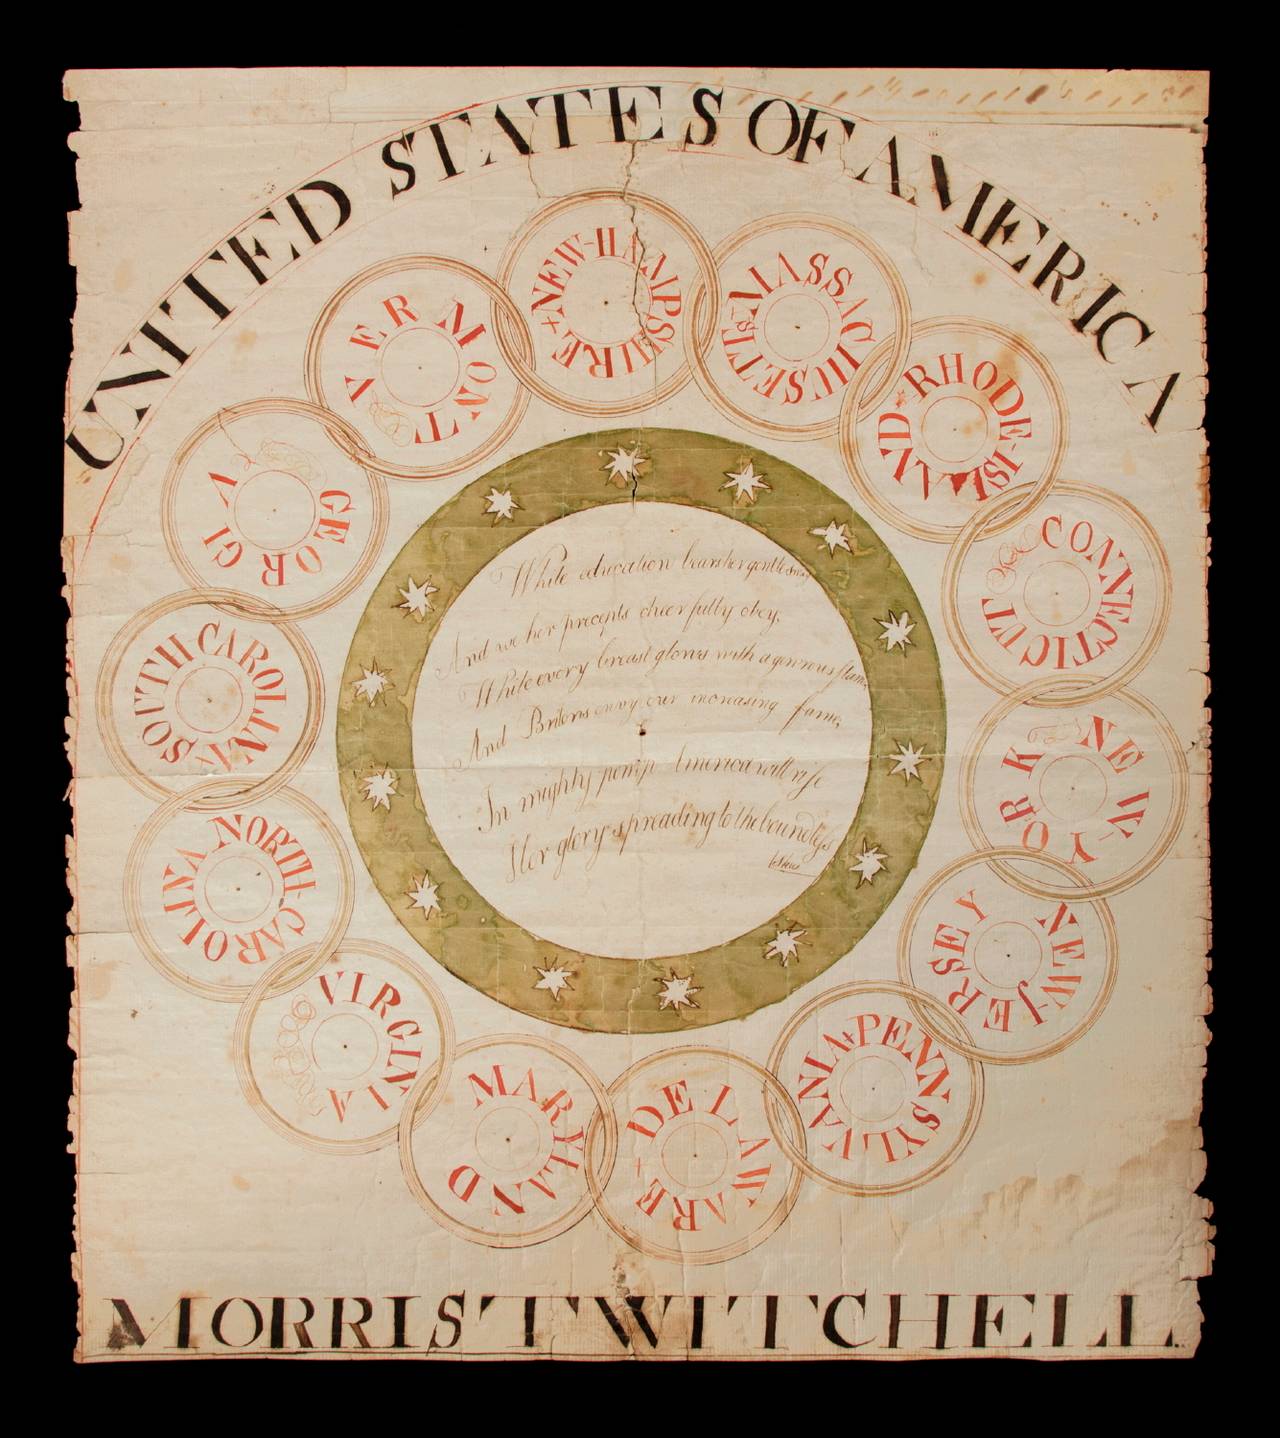 REMARKABLE PATRIOTIC SCHOOLCHILD WATERCOLOR BY MORRIS TWITCHELL, ILLUSTRATING THE ORIGINAL 13 COLONIES PLUS VERMONT AS CONJOINED RINGS, 1791-1792:

 Executed on laid paper, this beautiful patriotic pen and ink, watercolor fraktur drawing, entitled